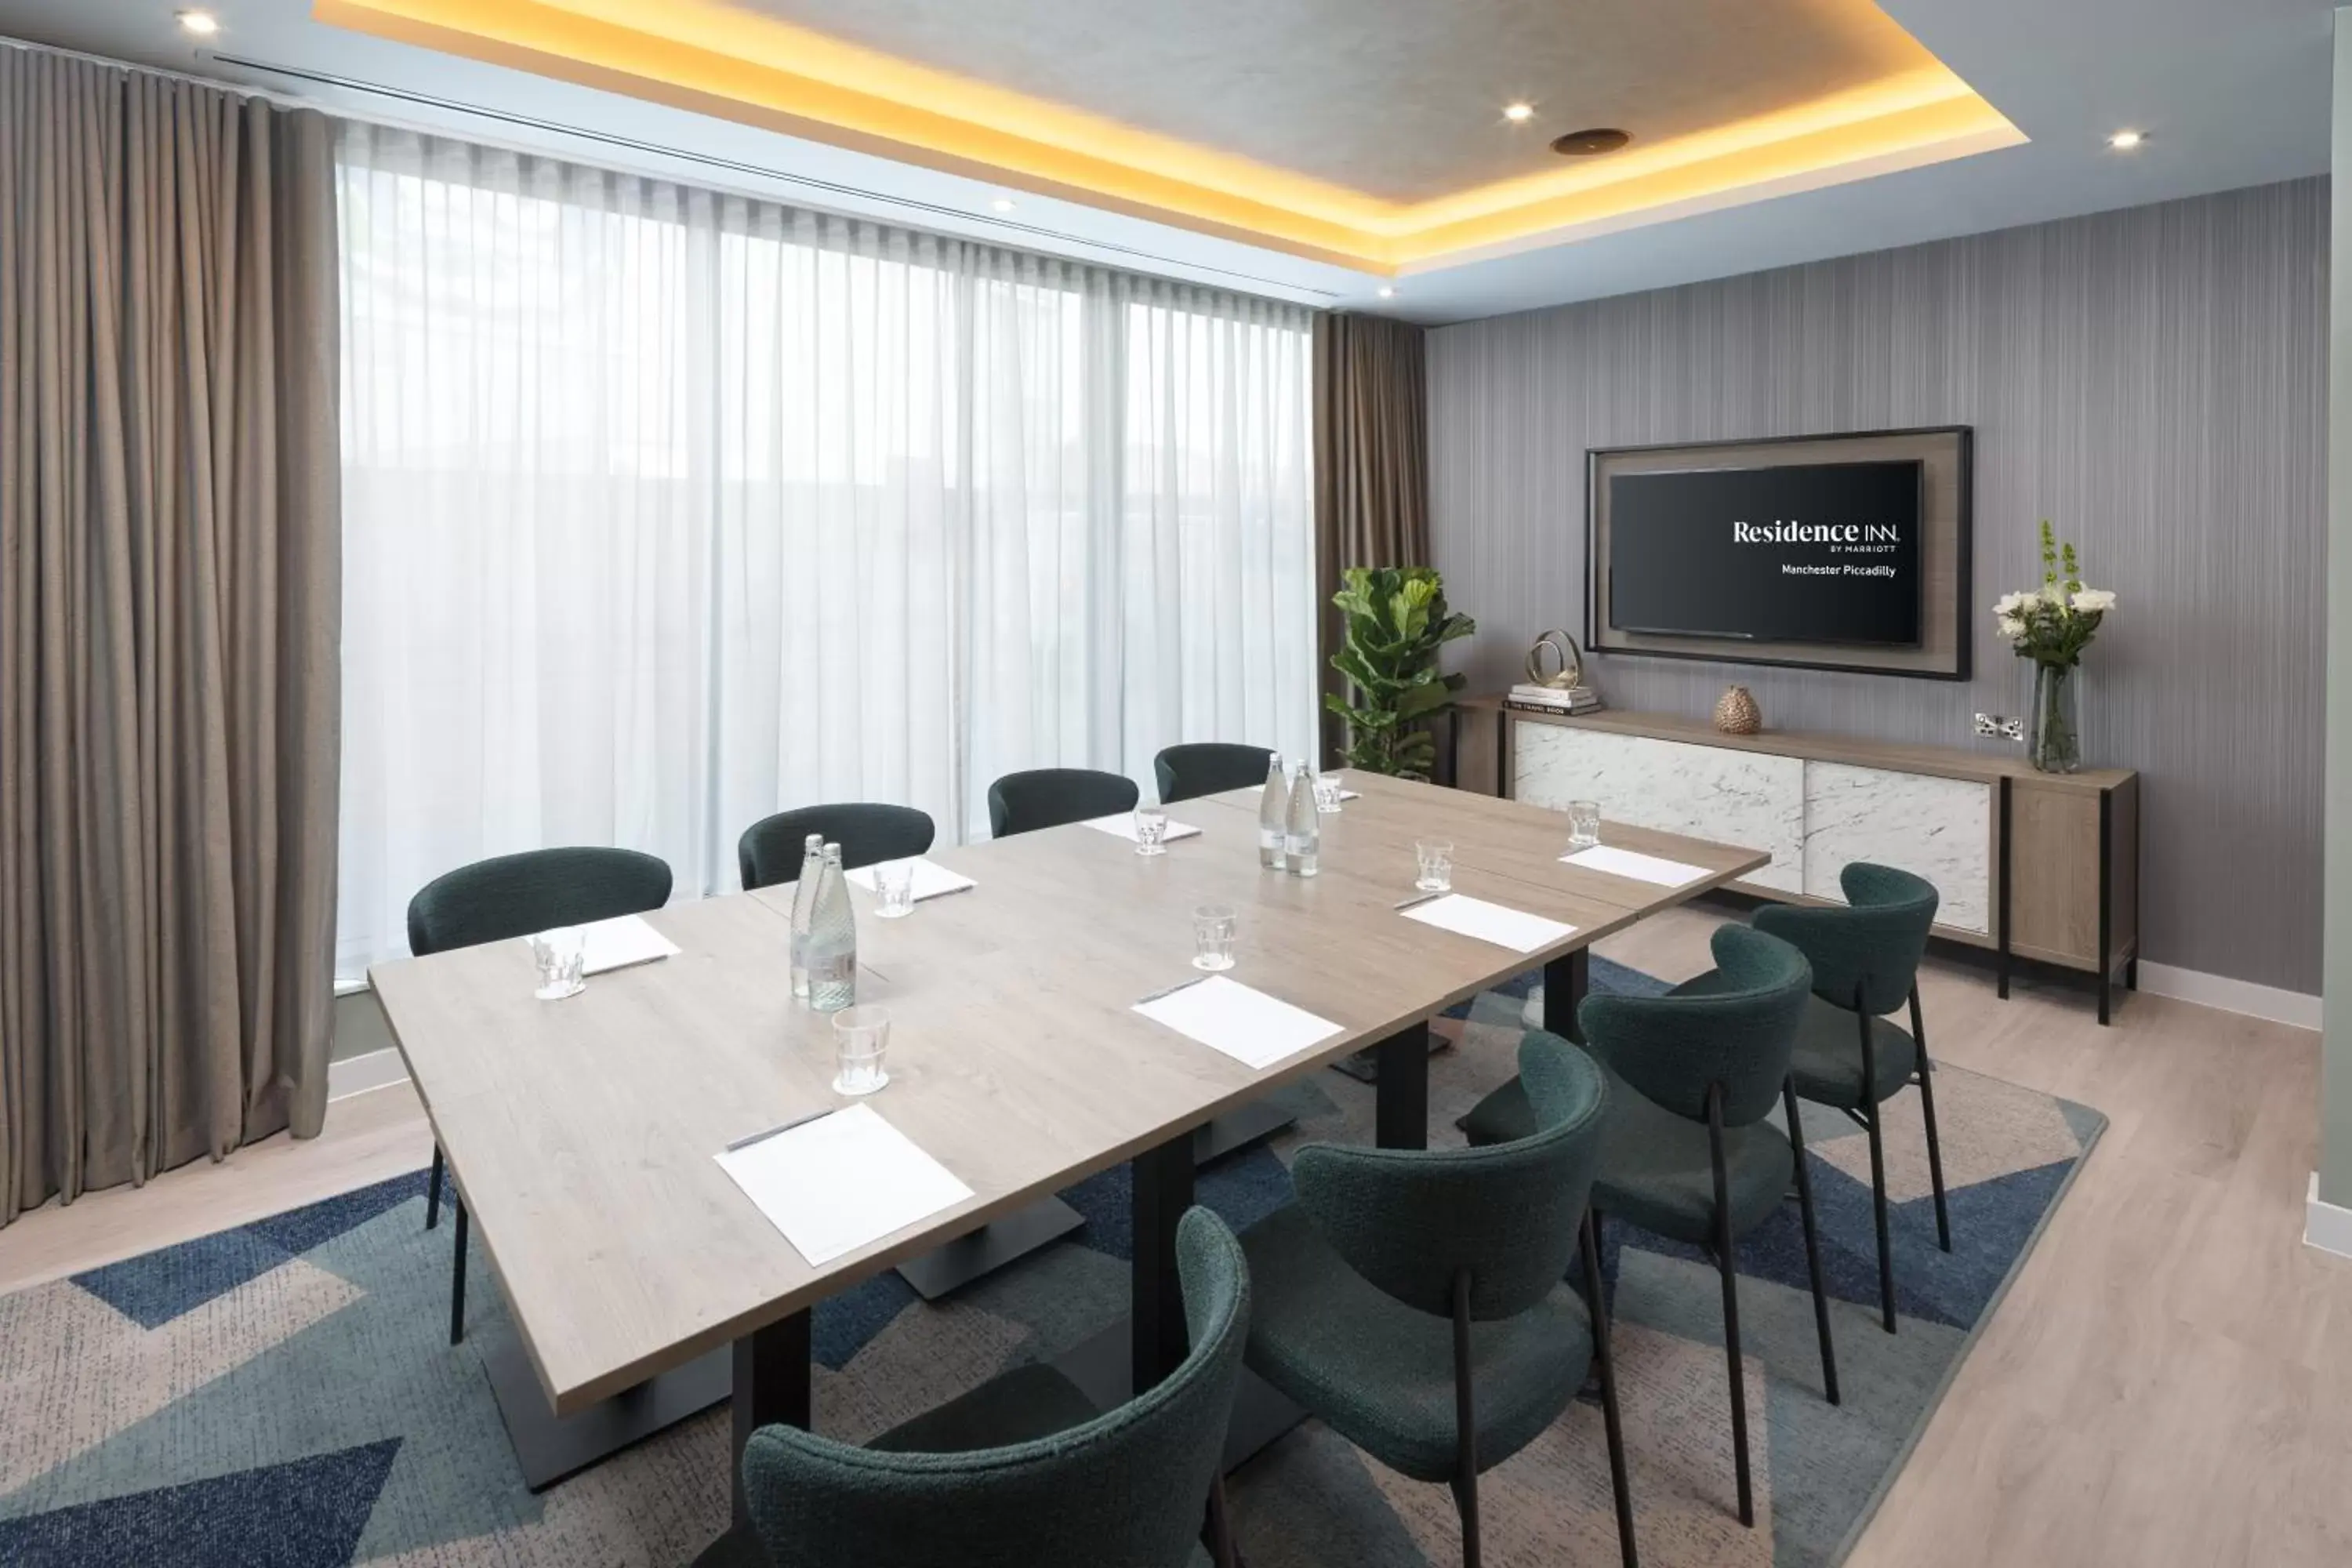 Business facilities in Residence Inn by Marriott Manchester Piccadilly